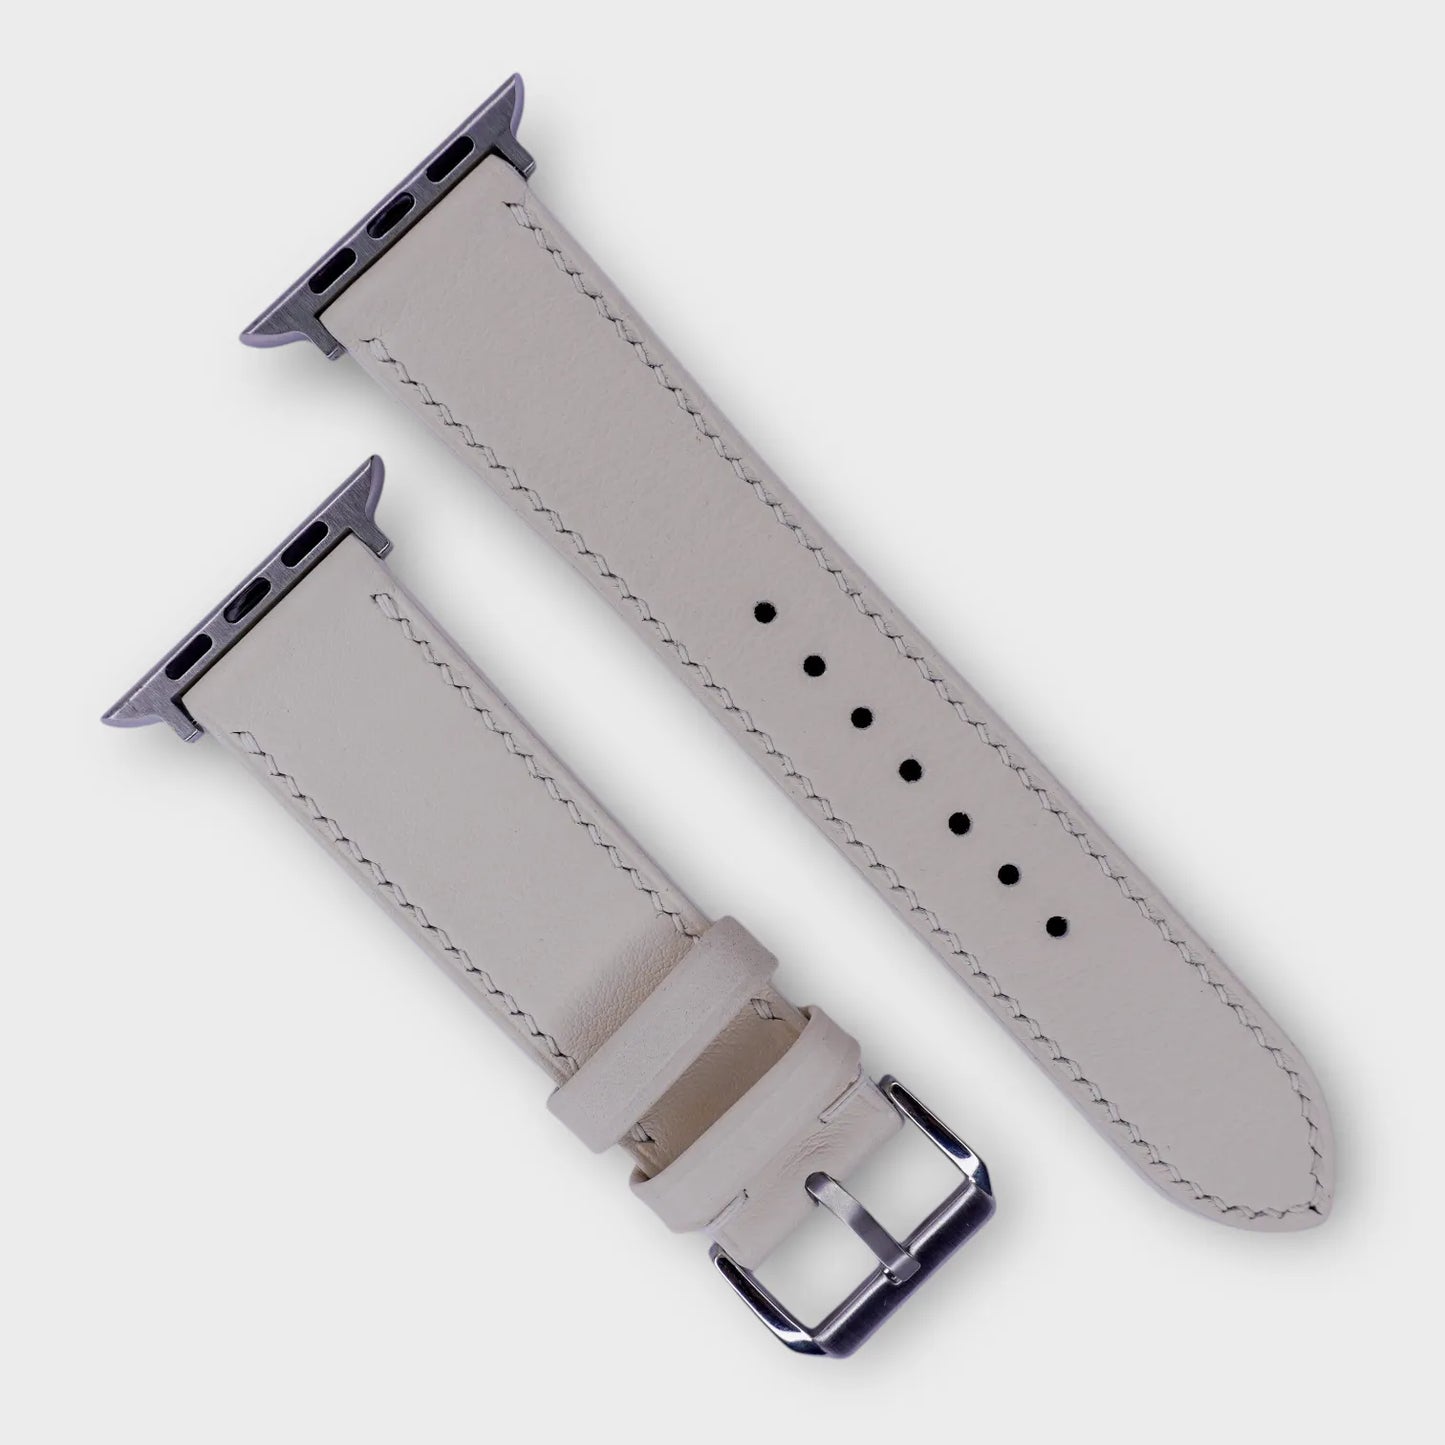 Sophisticated leather watch bands in white French Swift leather, detailing elegance.